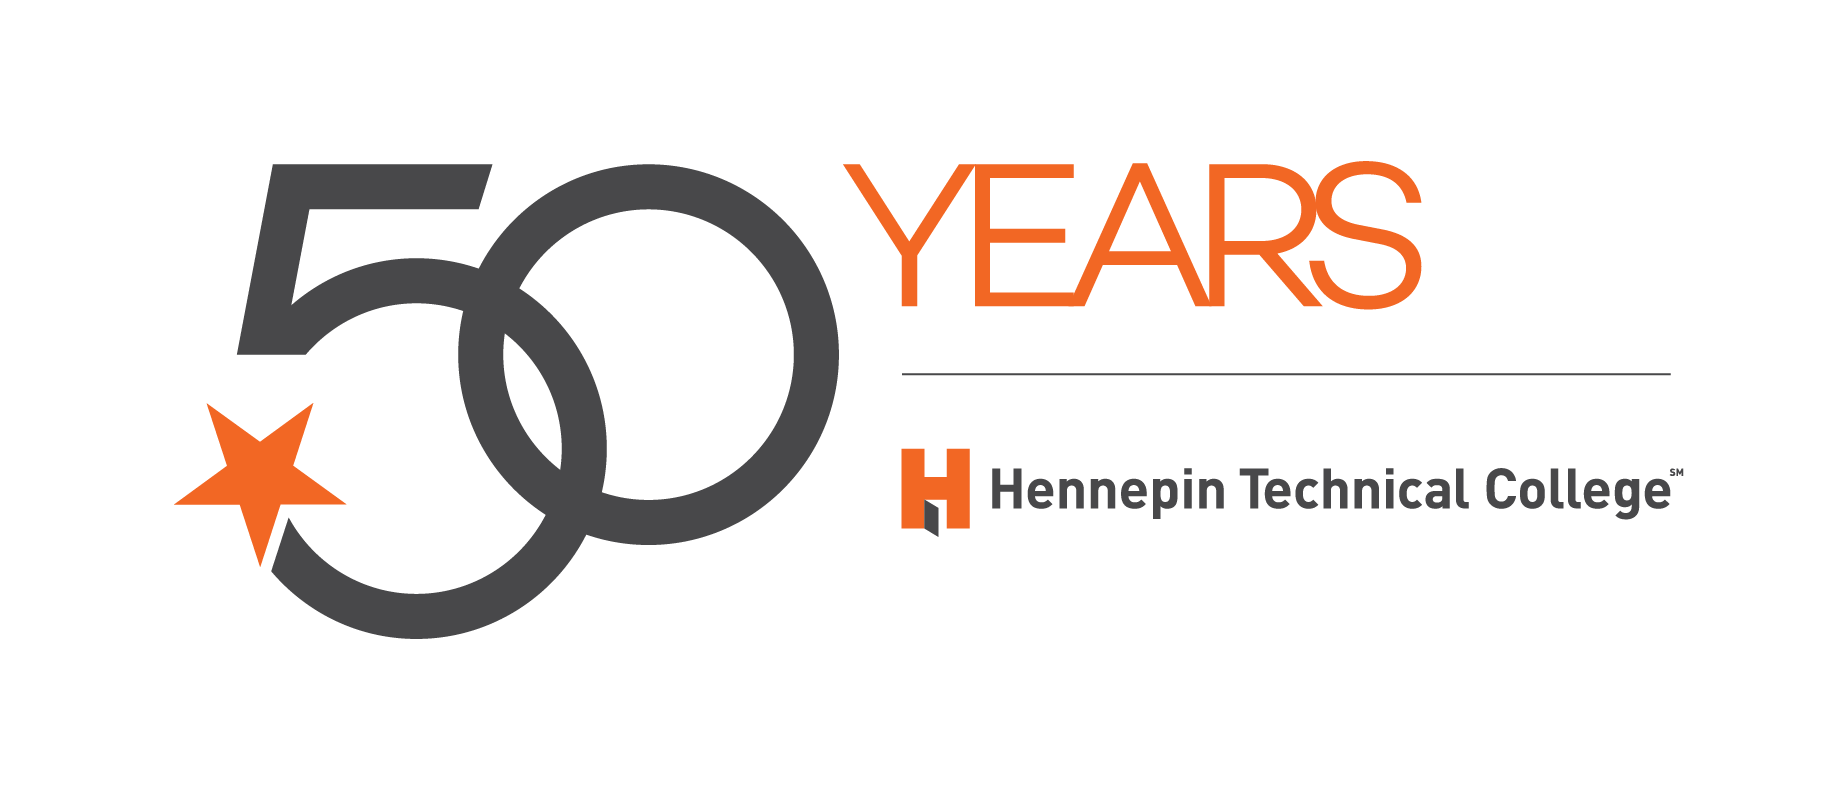 50 Years Hennepin Technical College SM logo